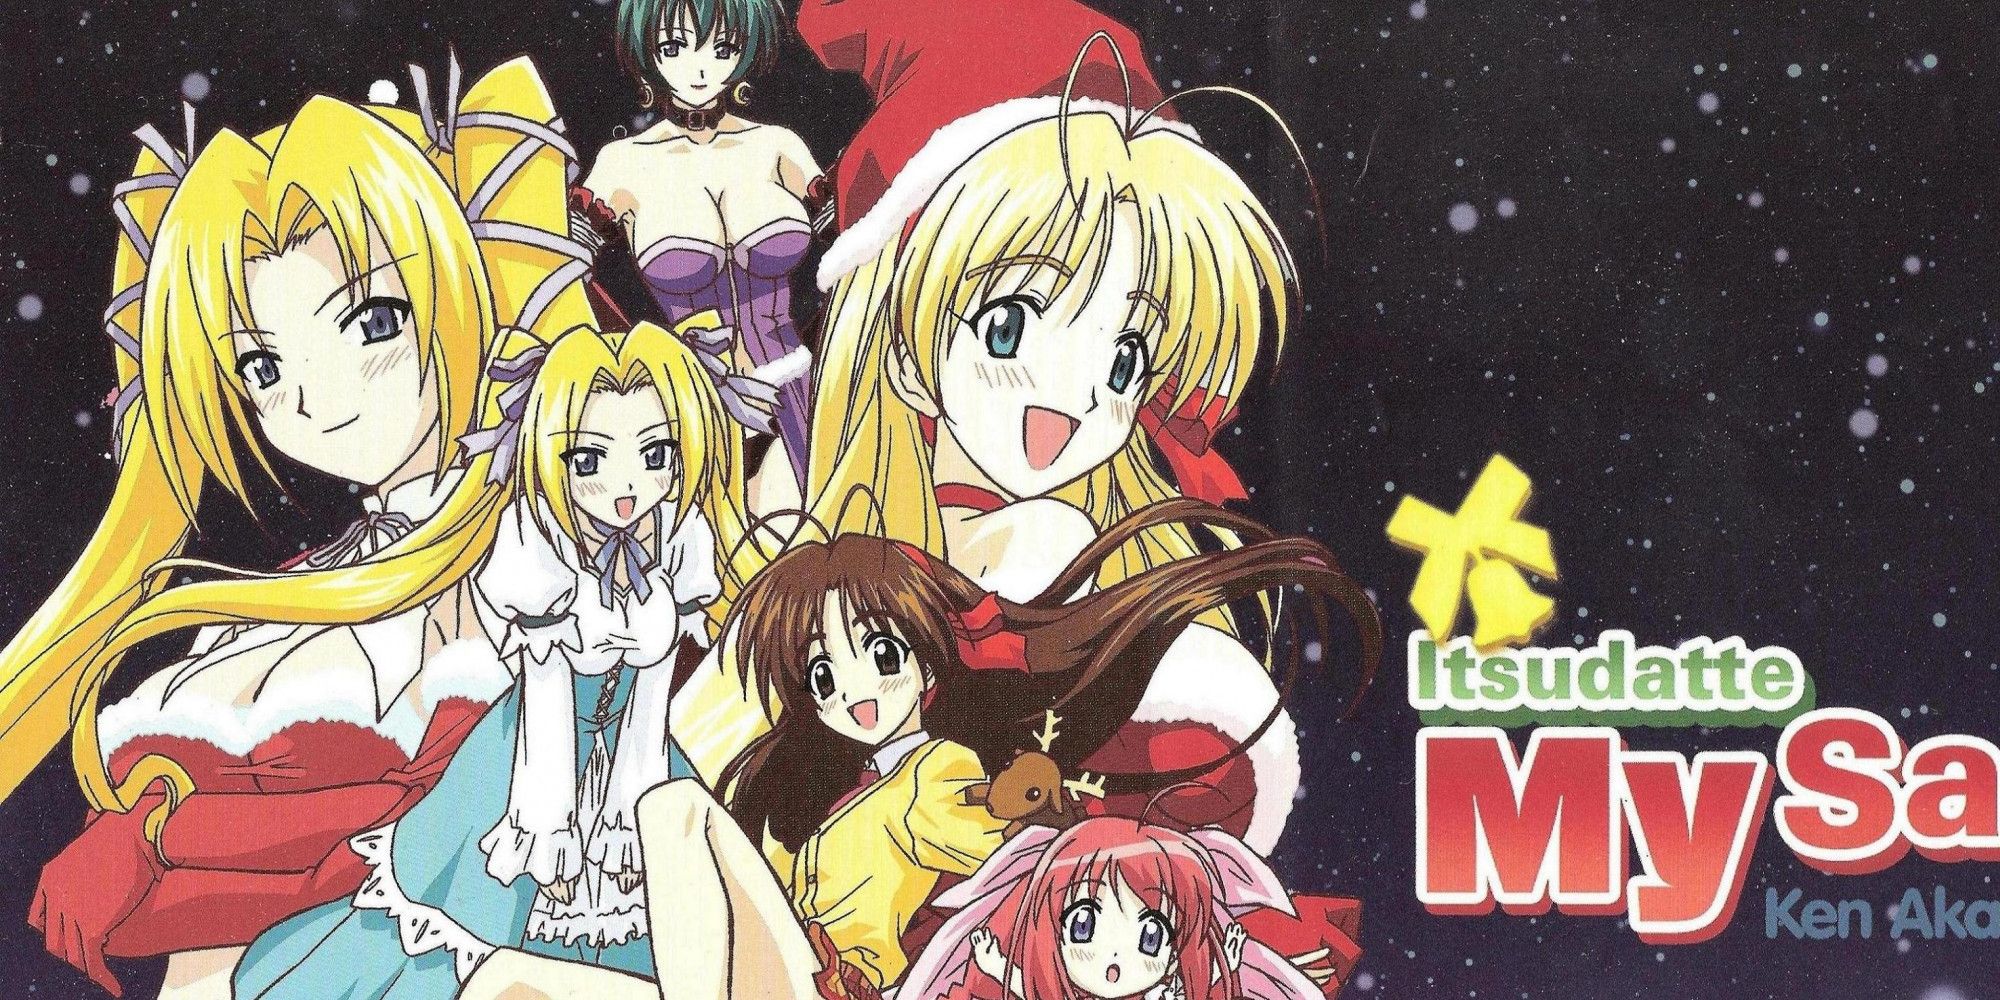 Promo image for Itsudatte My Santa showing the main female characters